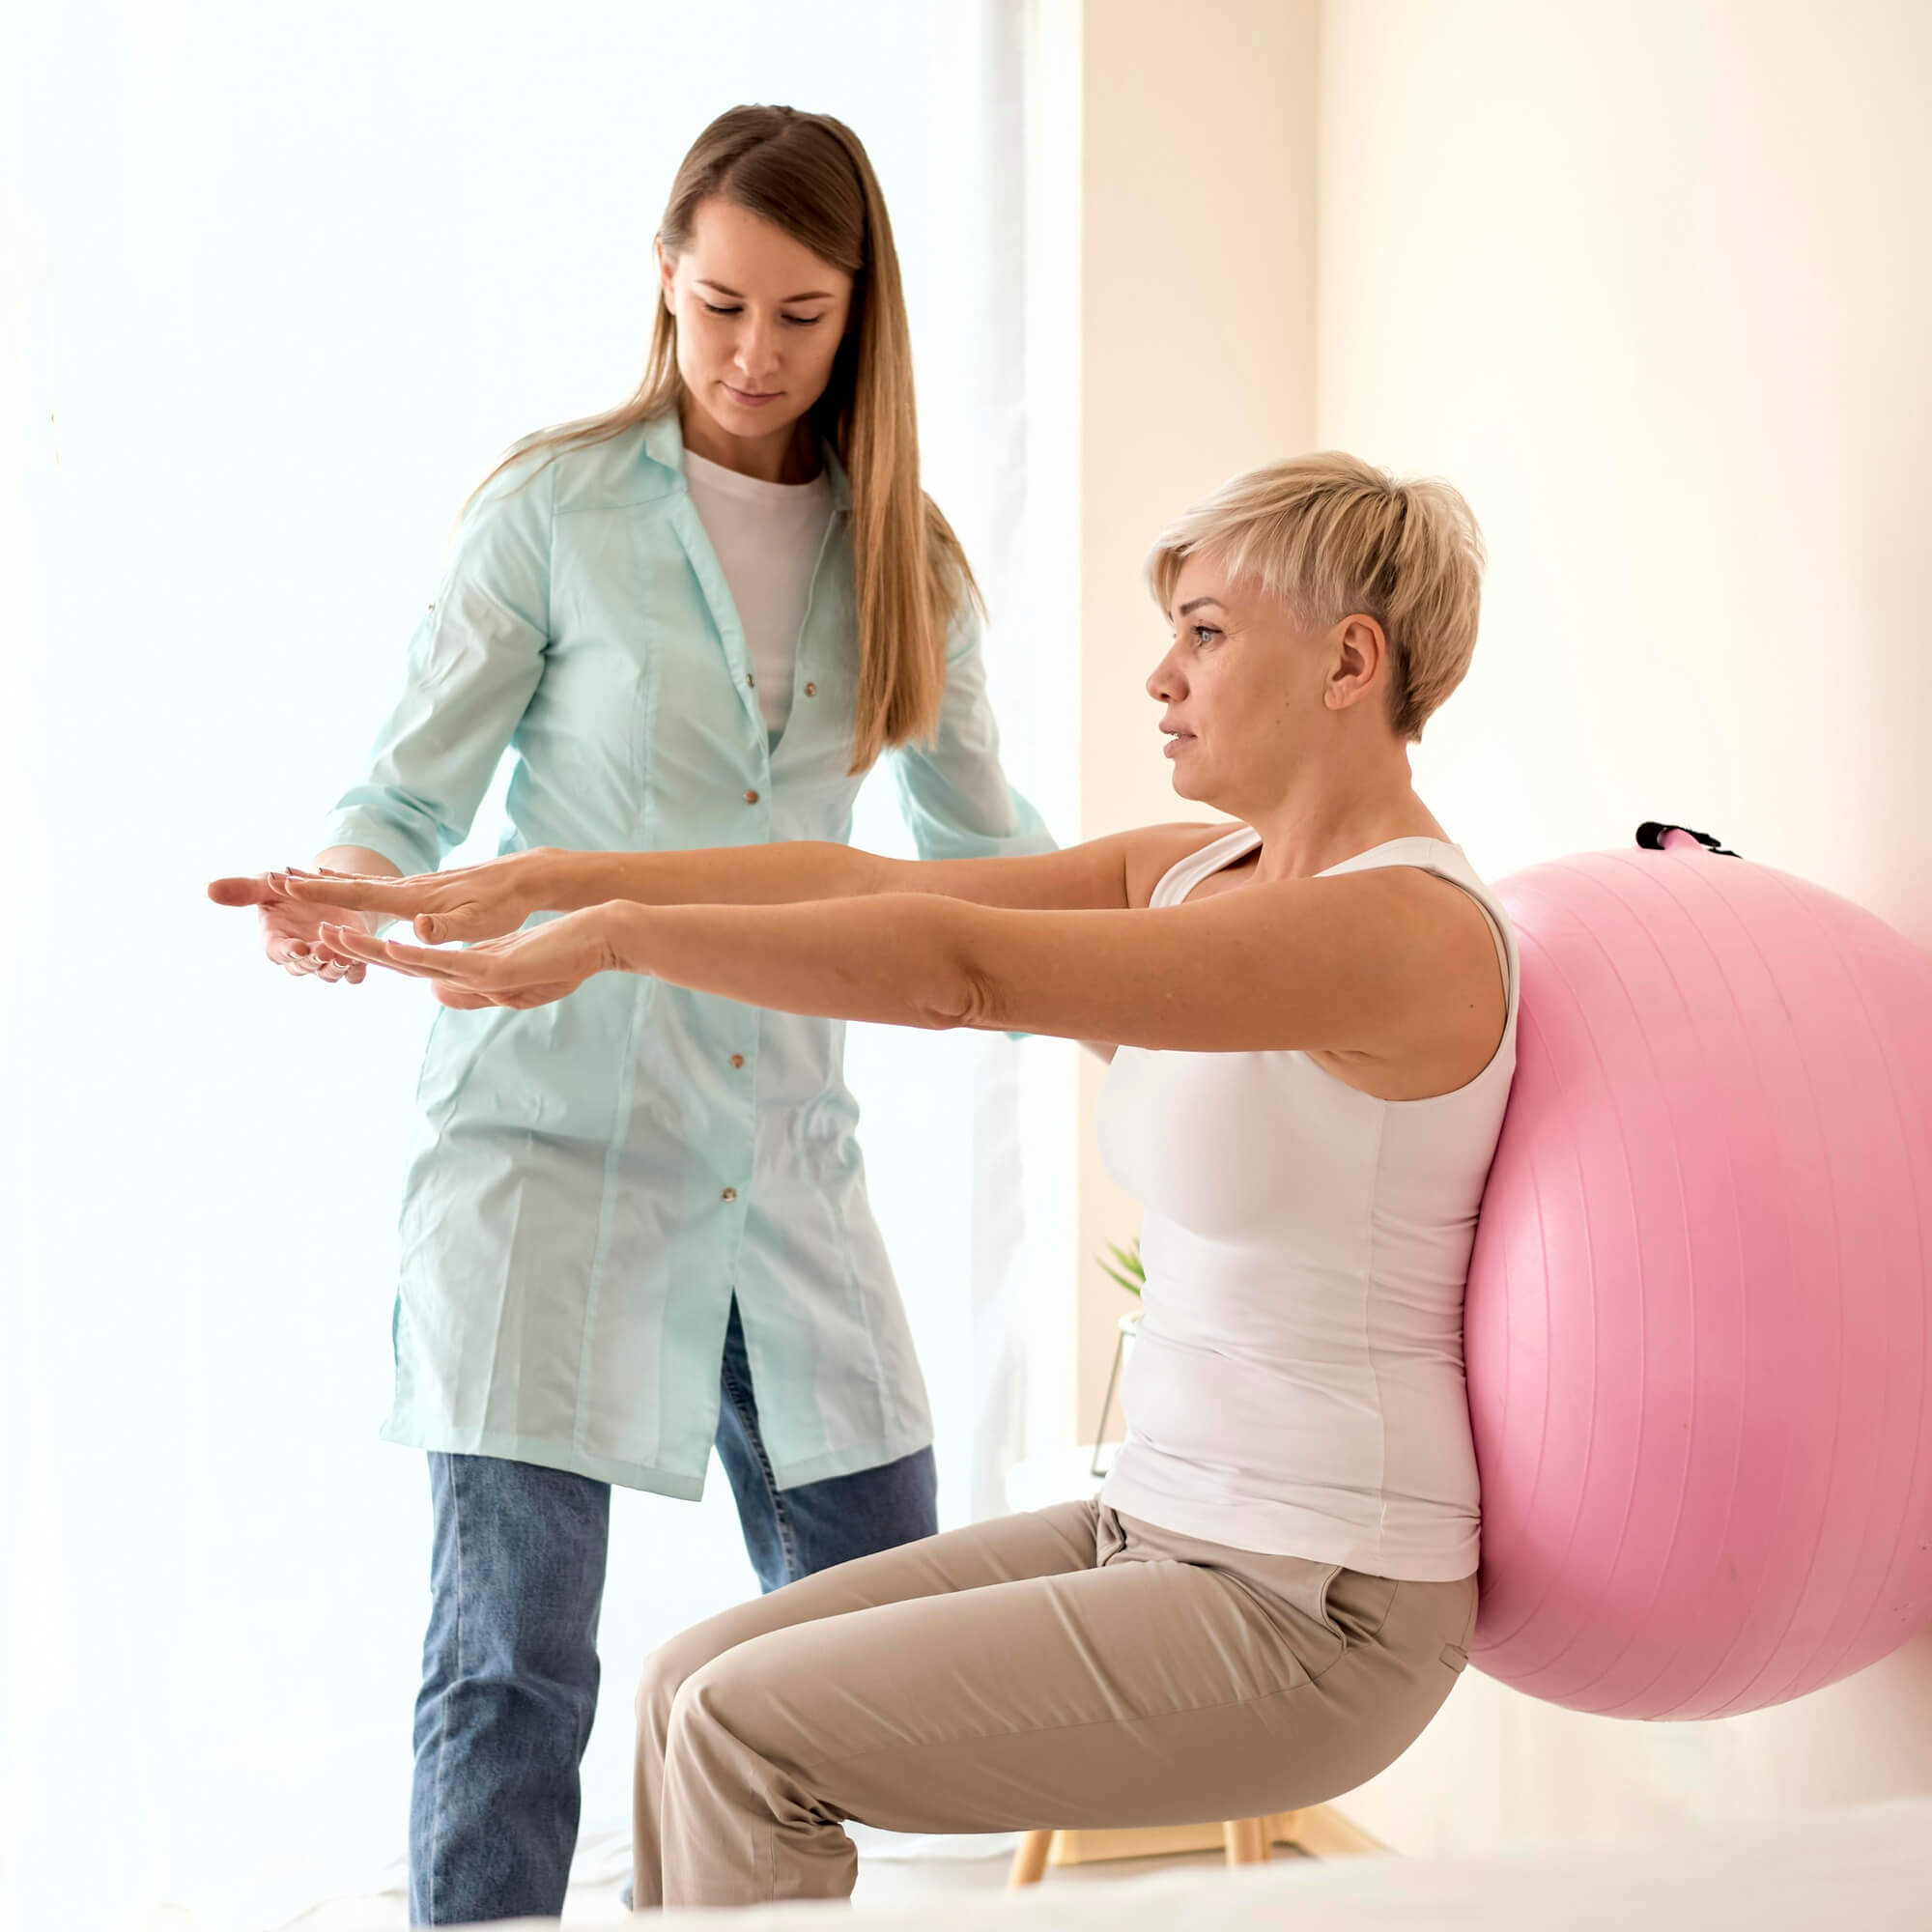 female-patient-undergoing-therapy-with-physiotherapist